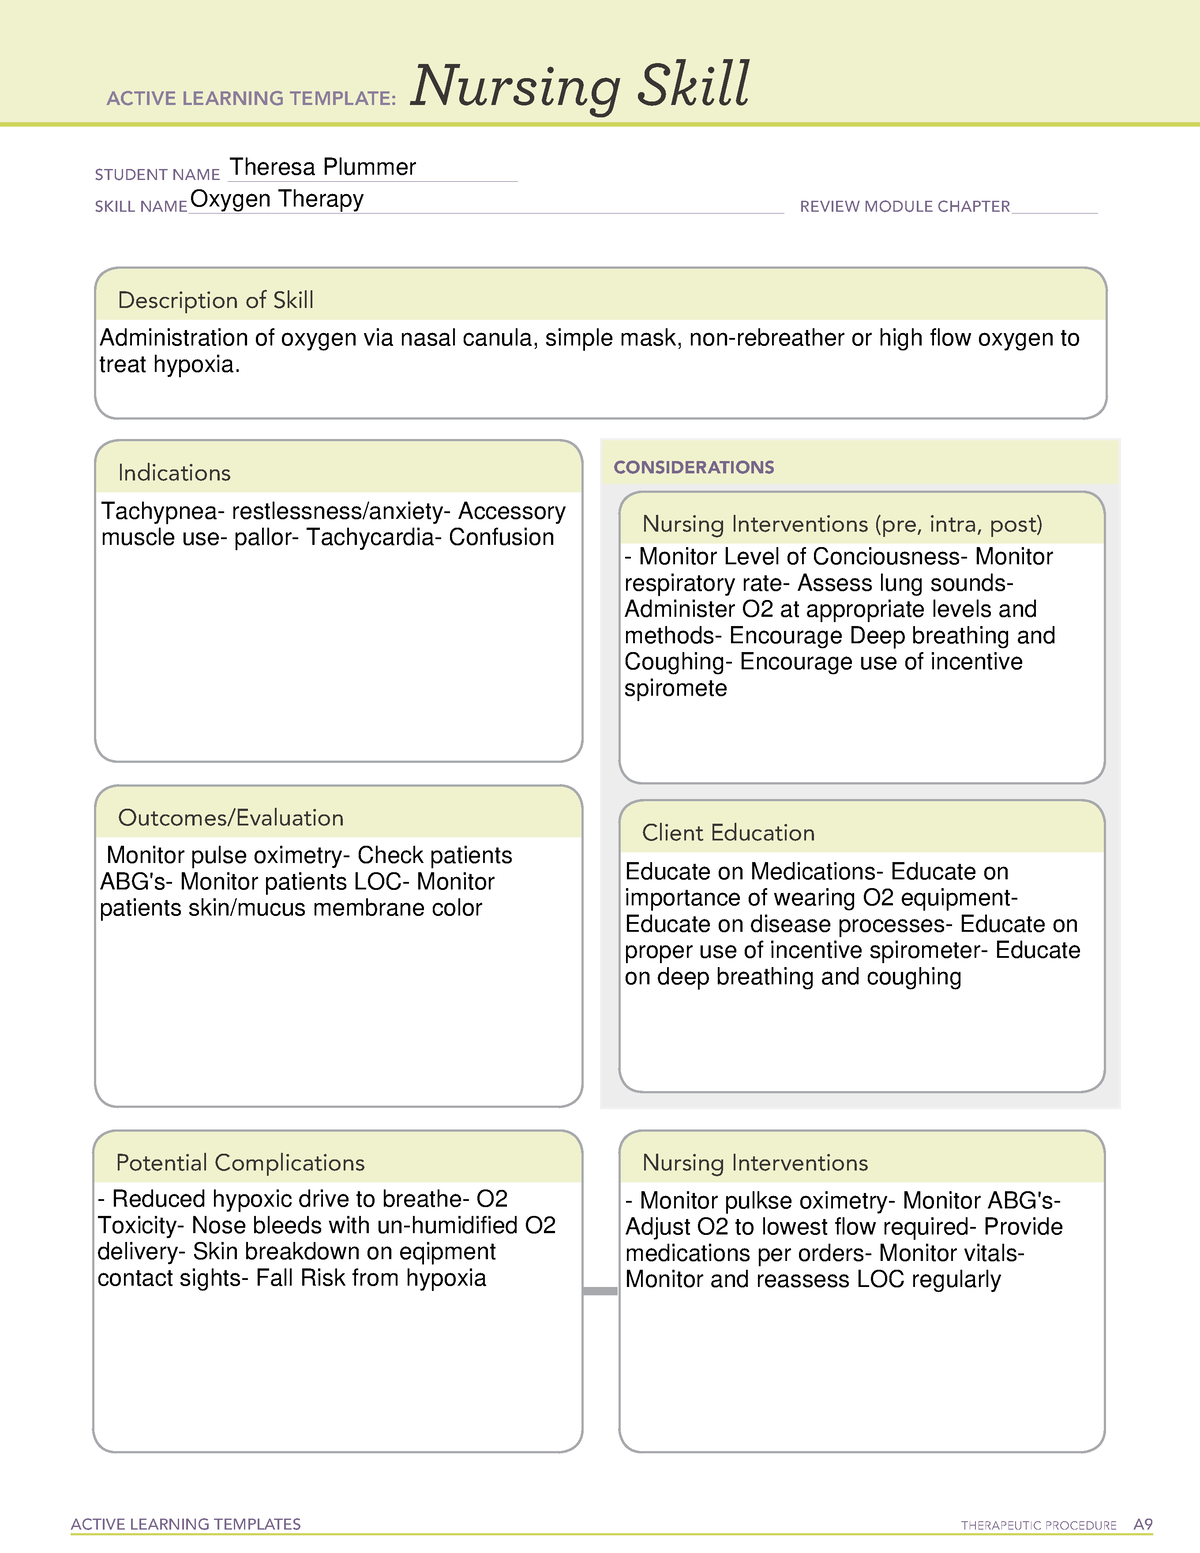 Nursing Skill Oxygen therapy ACTIVE LEARNING TEMPLATES THERAPEUTIC